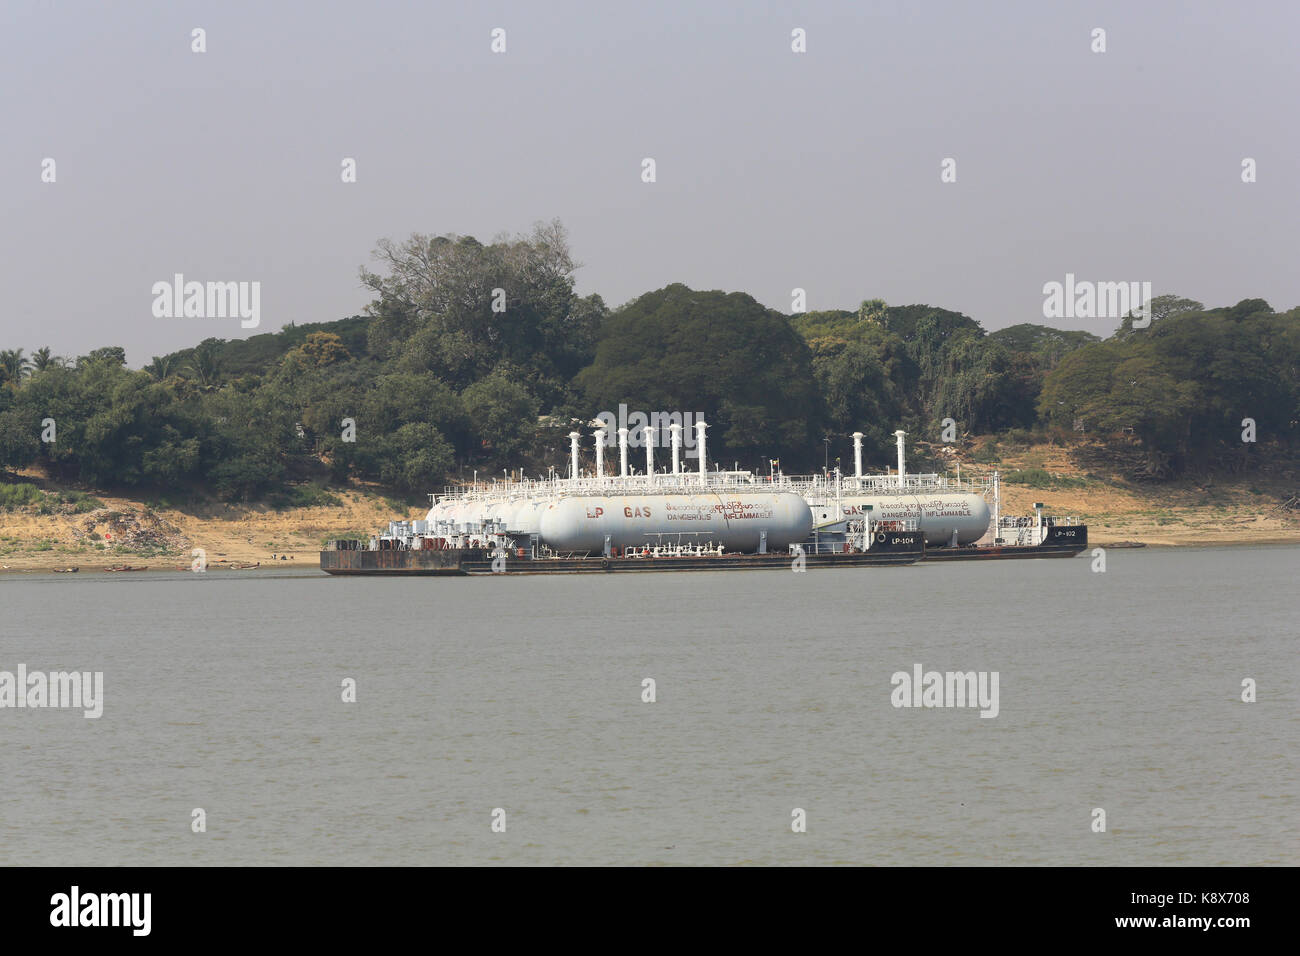 Two LP Gas barges moored to the banks of the Irrawaddy River in Myanmar (Burma). Stock Photo